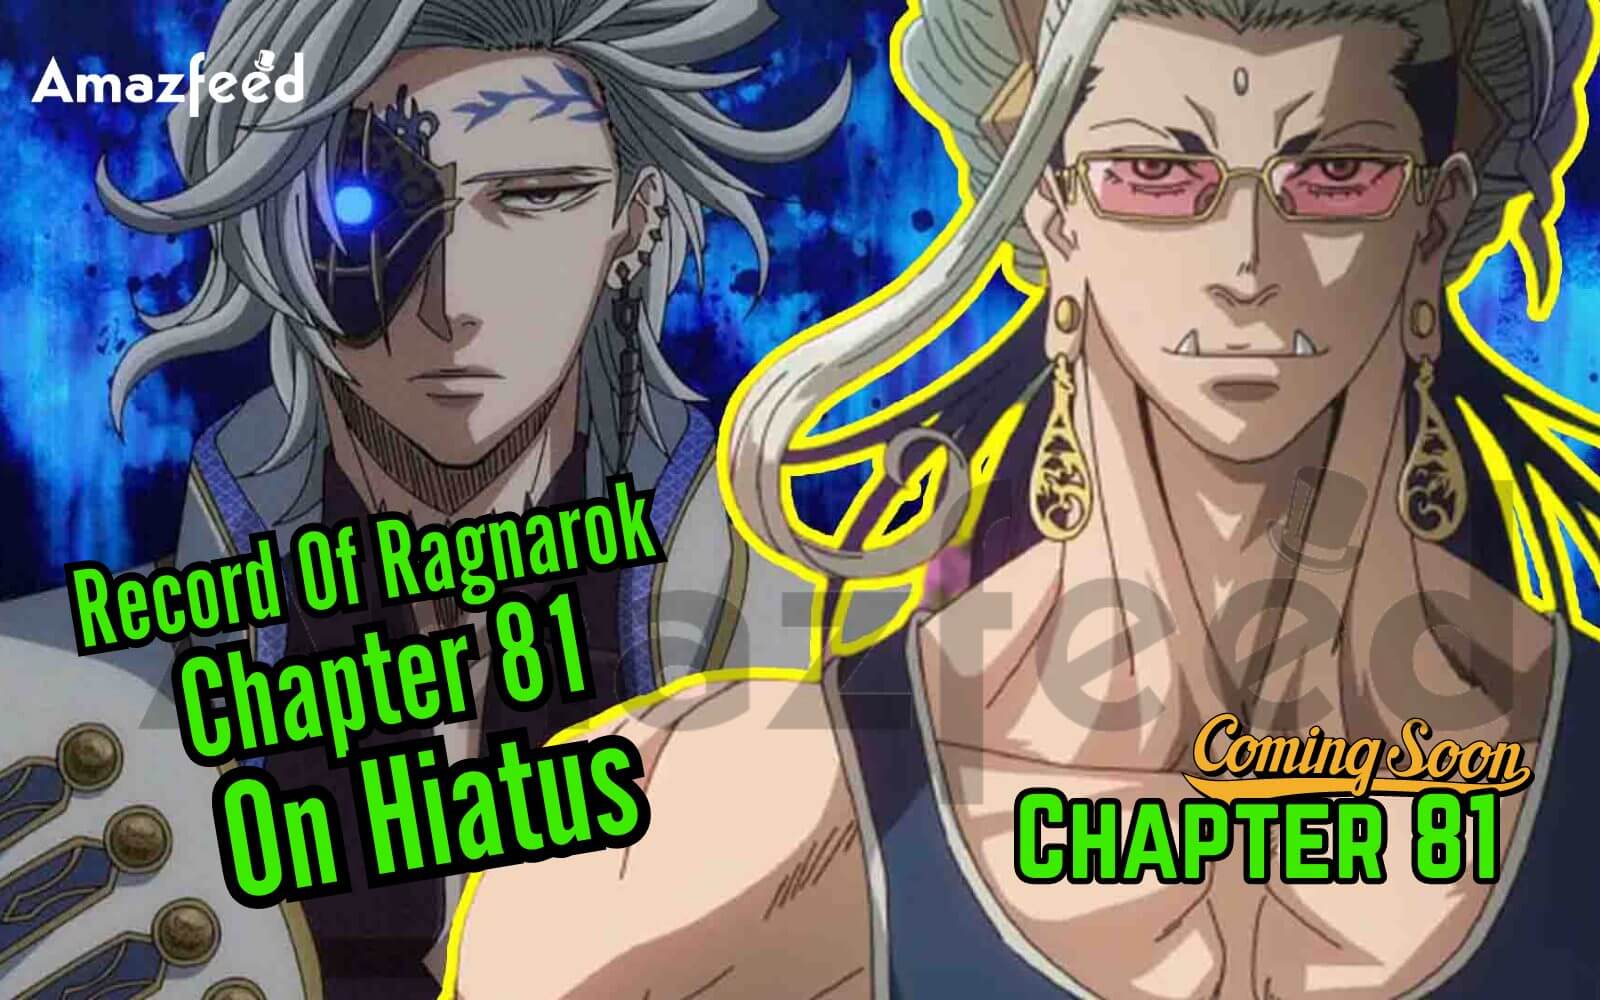 Spoilers for Record of Ragnarok chapter 81 Team Humanity is rejoicing